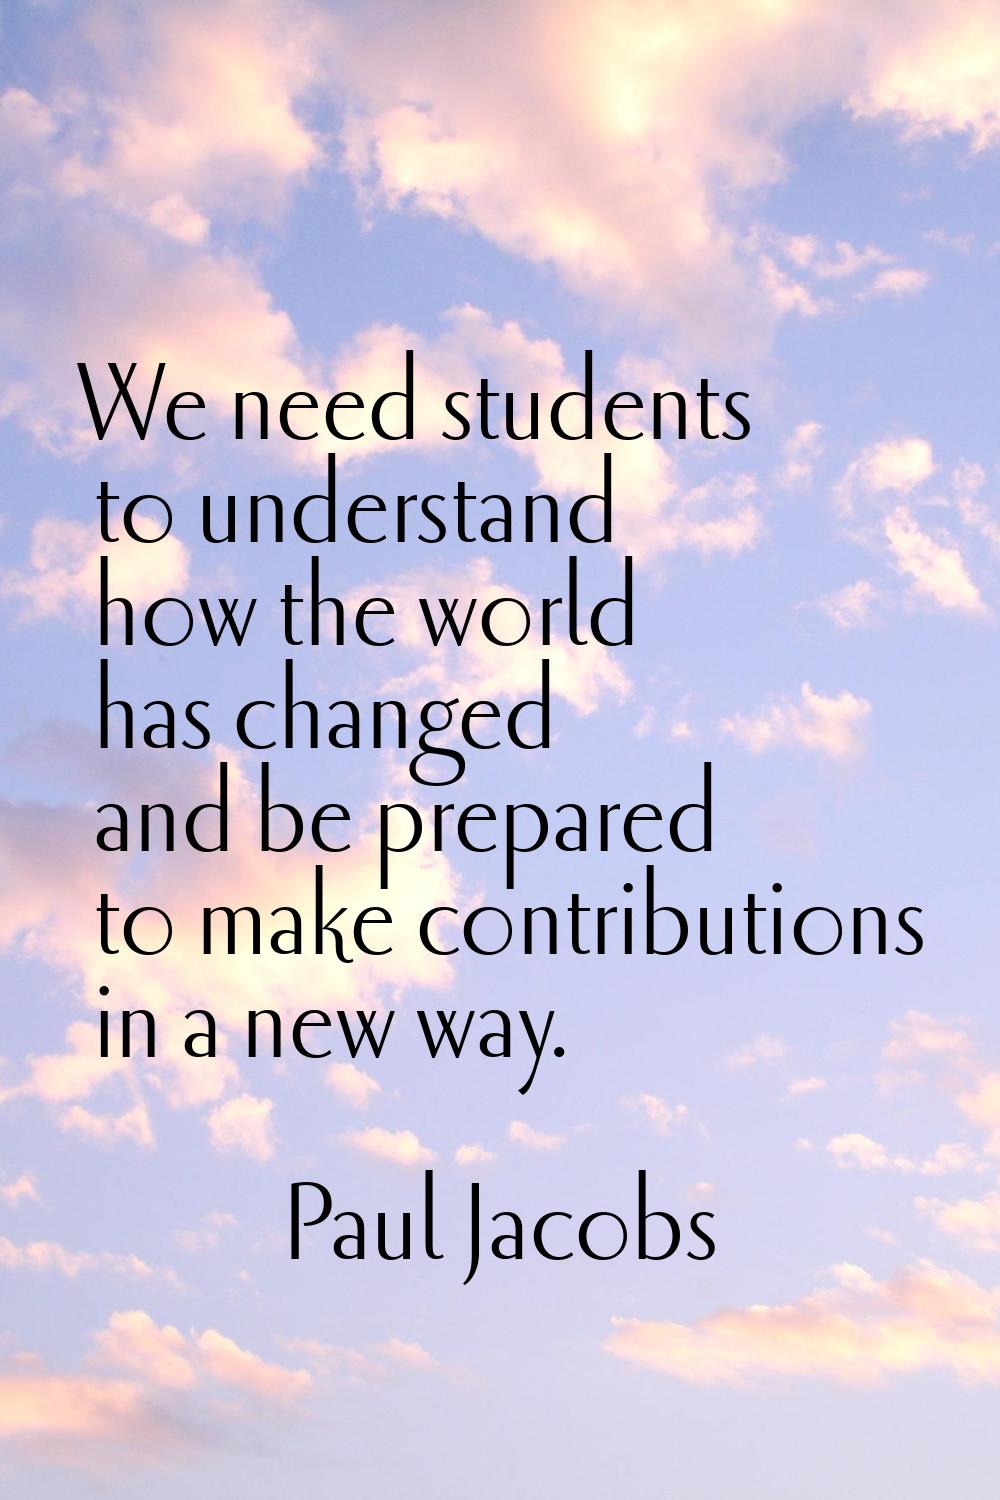 We need students to understand how the world has changed and be prepared to make contributions in a